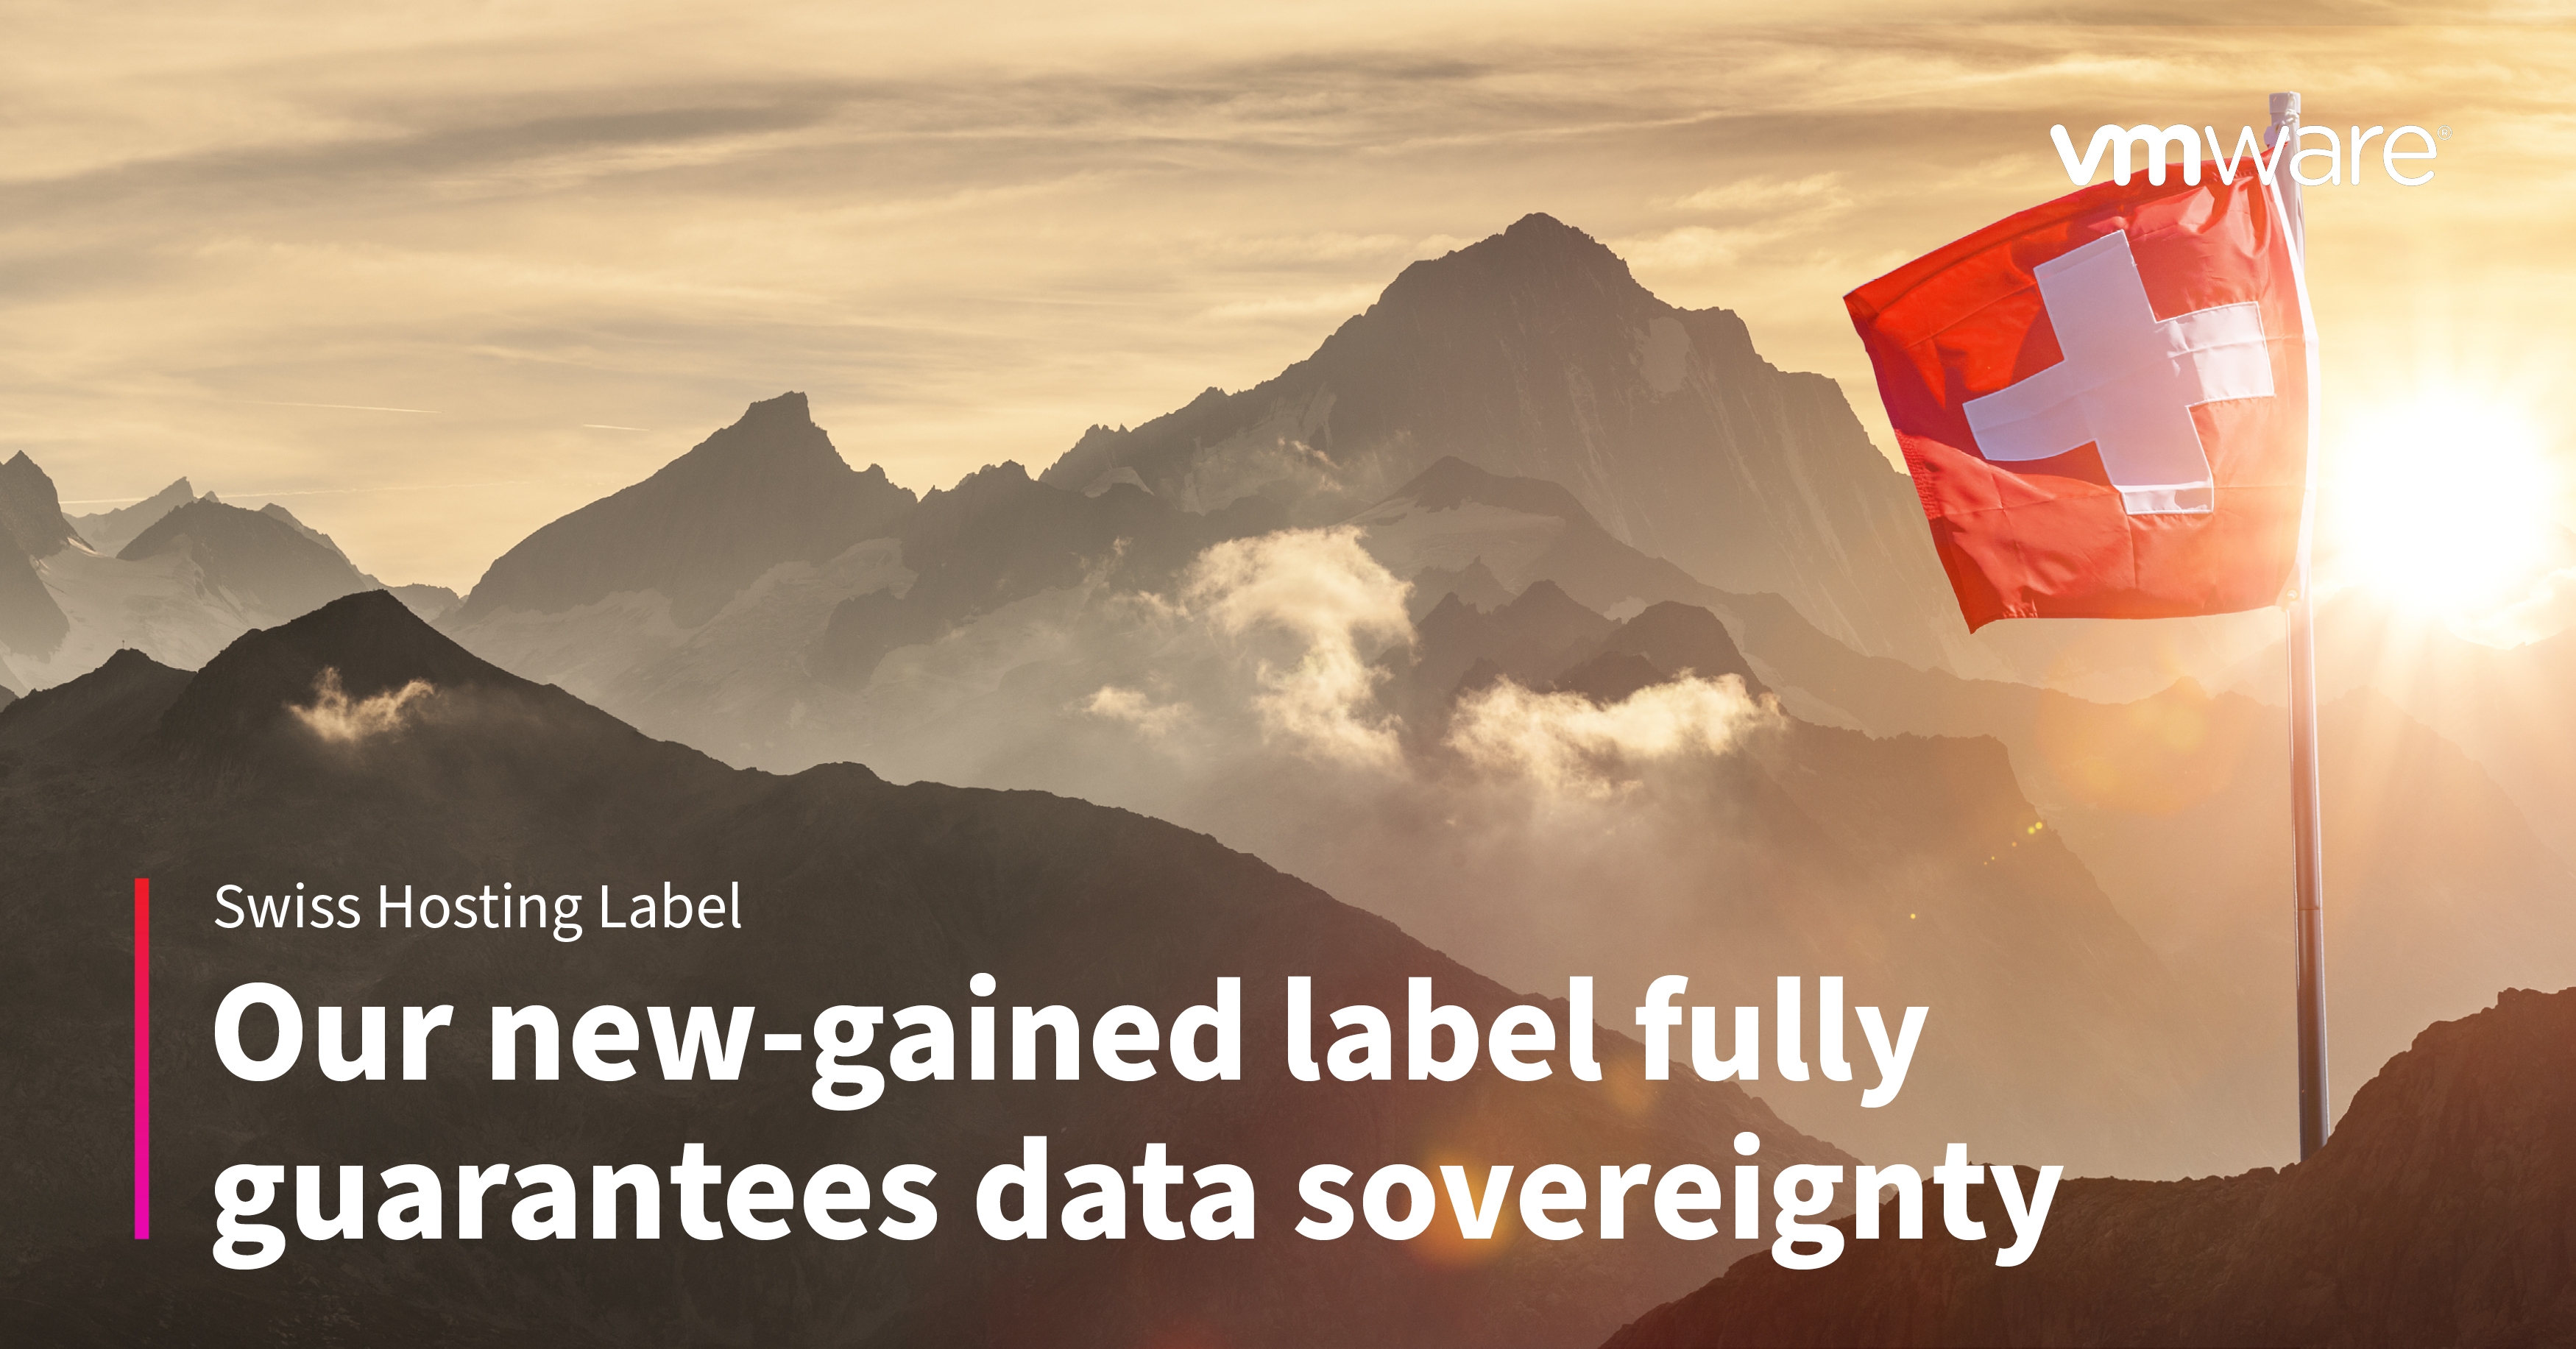 Our new-gained label fully guarantees data sovereignty